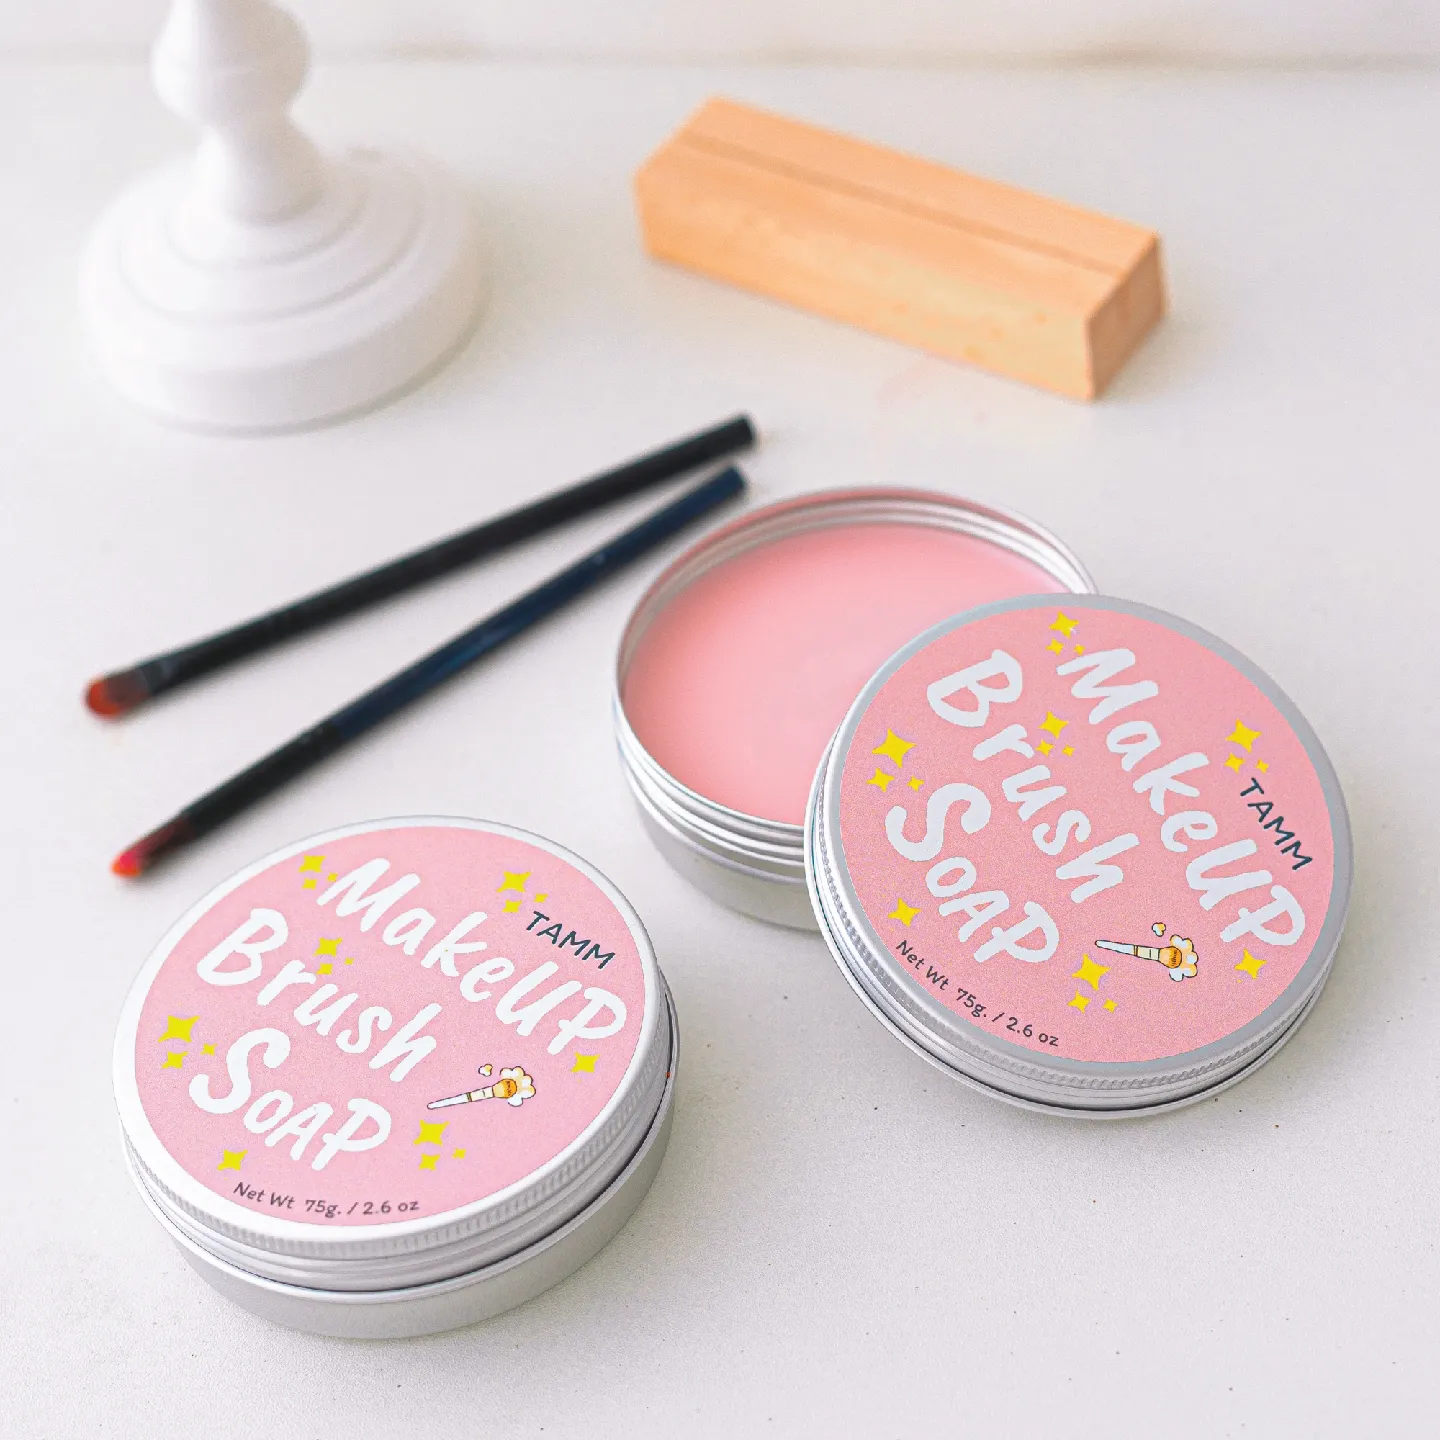 Make up brush SOAP ✨, Gallery posted by sini cha